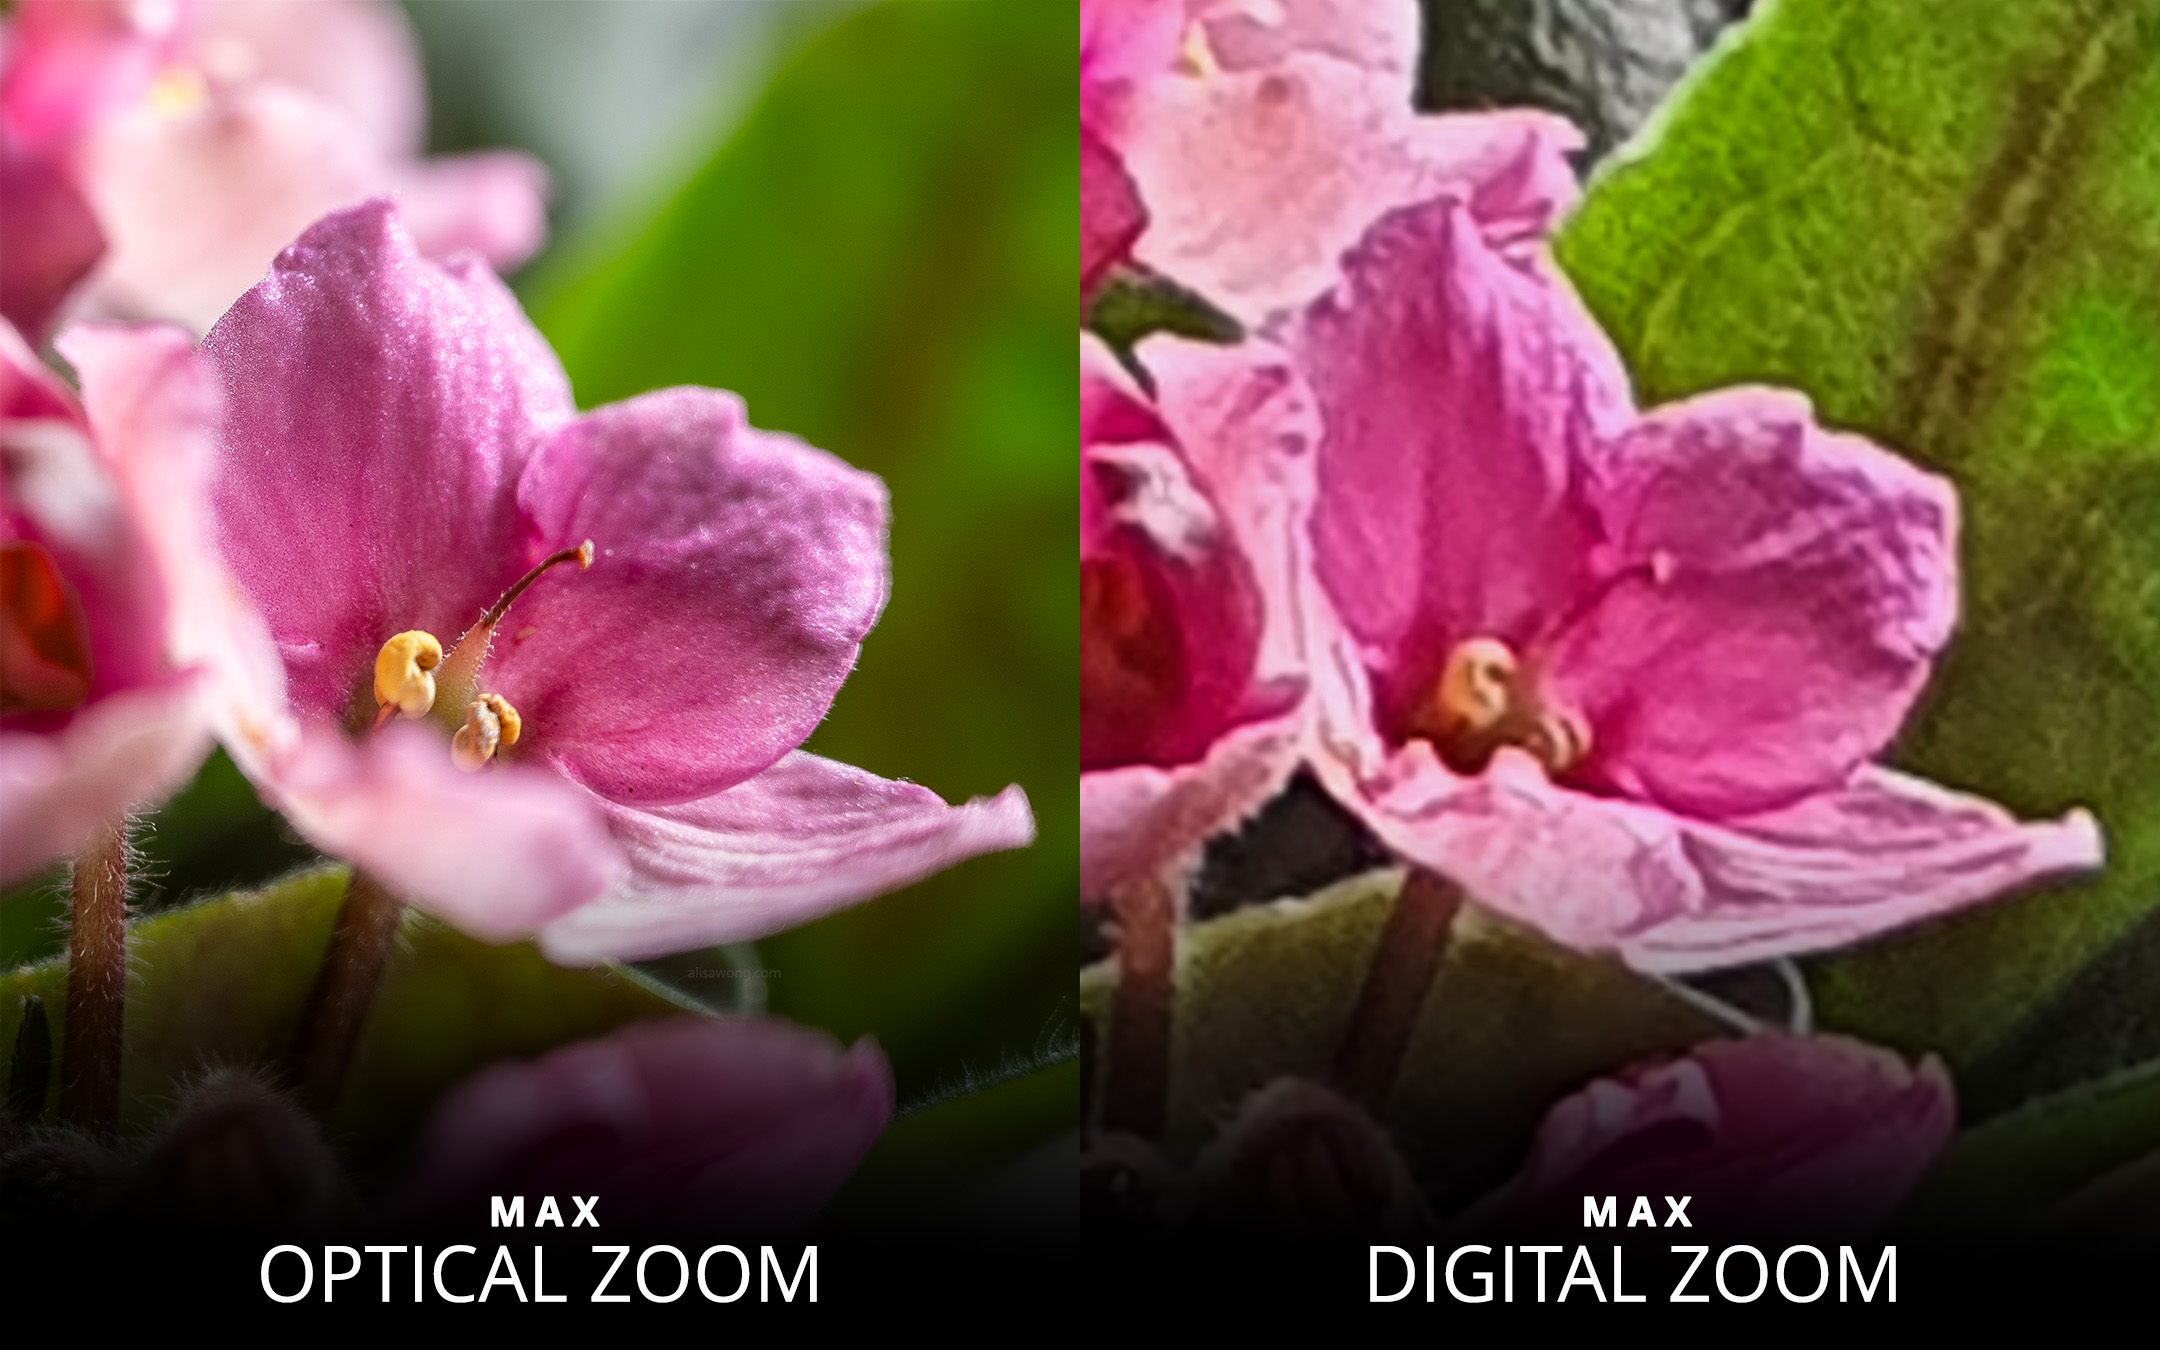 Comparison of an image of a flower with optical and digital zoom